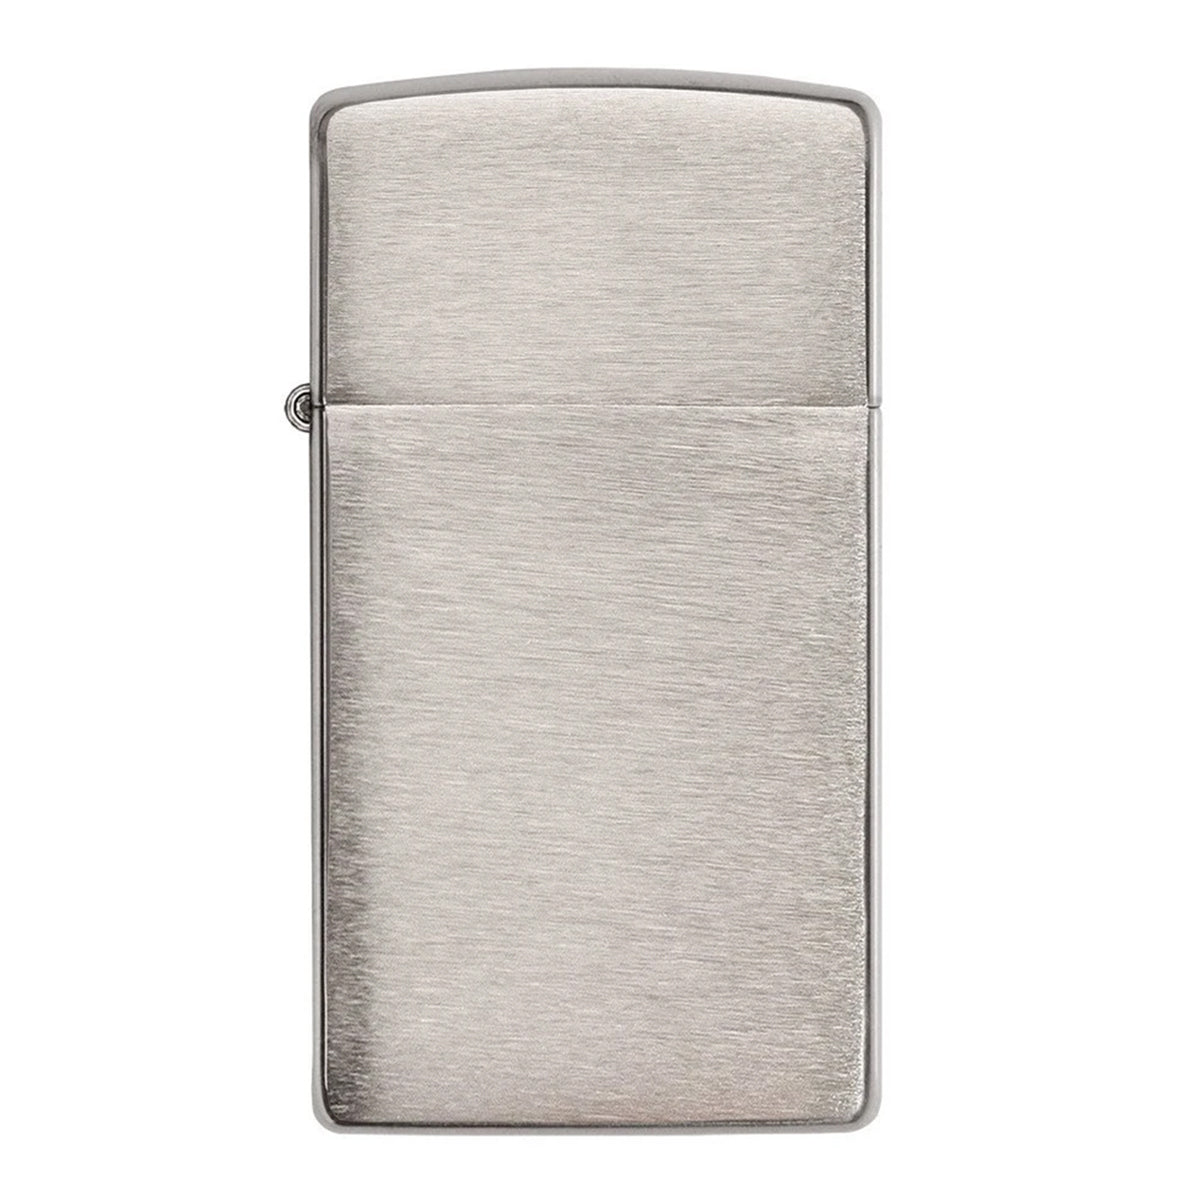 Brushed Chrome Zippo Lighters